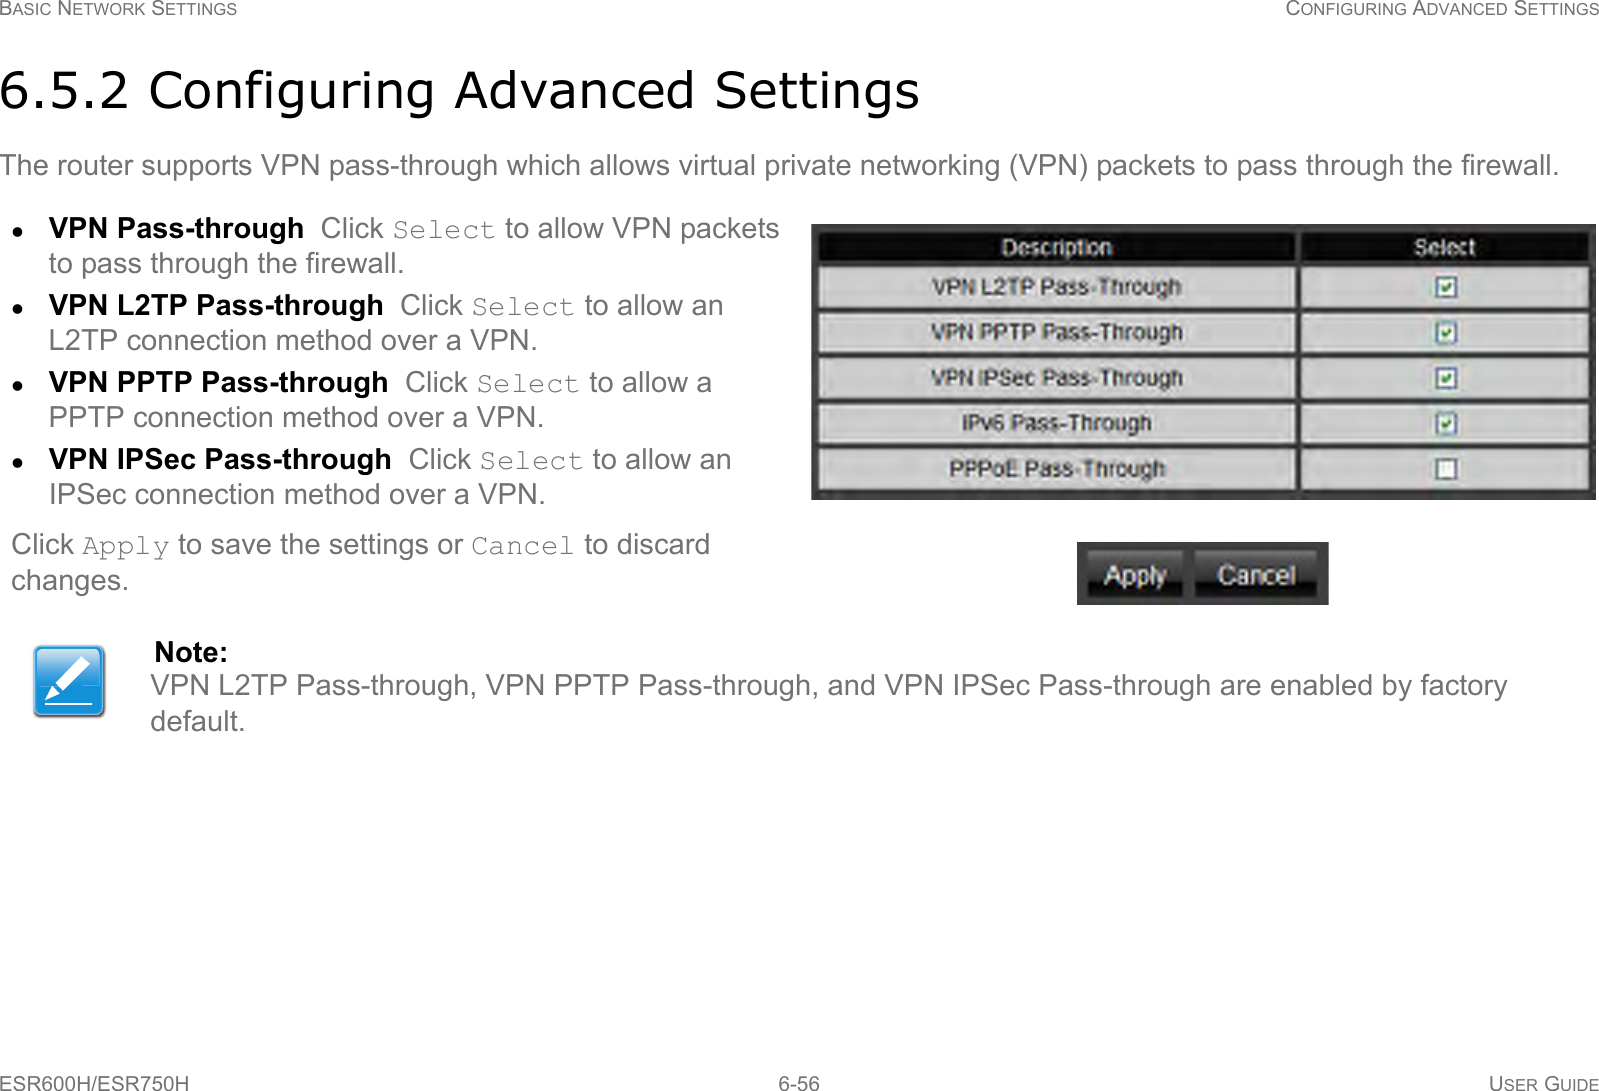 BASIC NETWORK SETTINGS CONFIGURING ADVANCED SETTINGSESR600H/ESR750H 6-56 USER GUIDE6.5.2 Configuring Advanced SettingsThe router supports VPN pass-through which allows virtual private networking (VPN) packets to pass through the firewall.VPN Pass-through  Click Select to allow VPN packets to pass through the firewall.VPN L2TP Pass-through  Click Select to allow an L2TP connection method over a VPN.VPN PPTP Pass-through  Click Select to allow a PPTP connection method over a VPN.VPN IPSec Pass-through  Click Select to allow an IPSec connection method over a VPN.Click Apply to save the settings or Cancel to discard changes.Note:VPN L2TP Pass-through, VPN PPTP Pass-through, and VPN IPSec Pass-through are enabled by factory default.